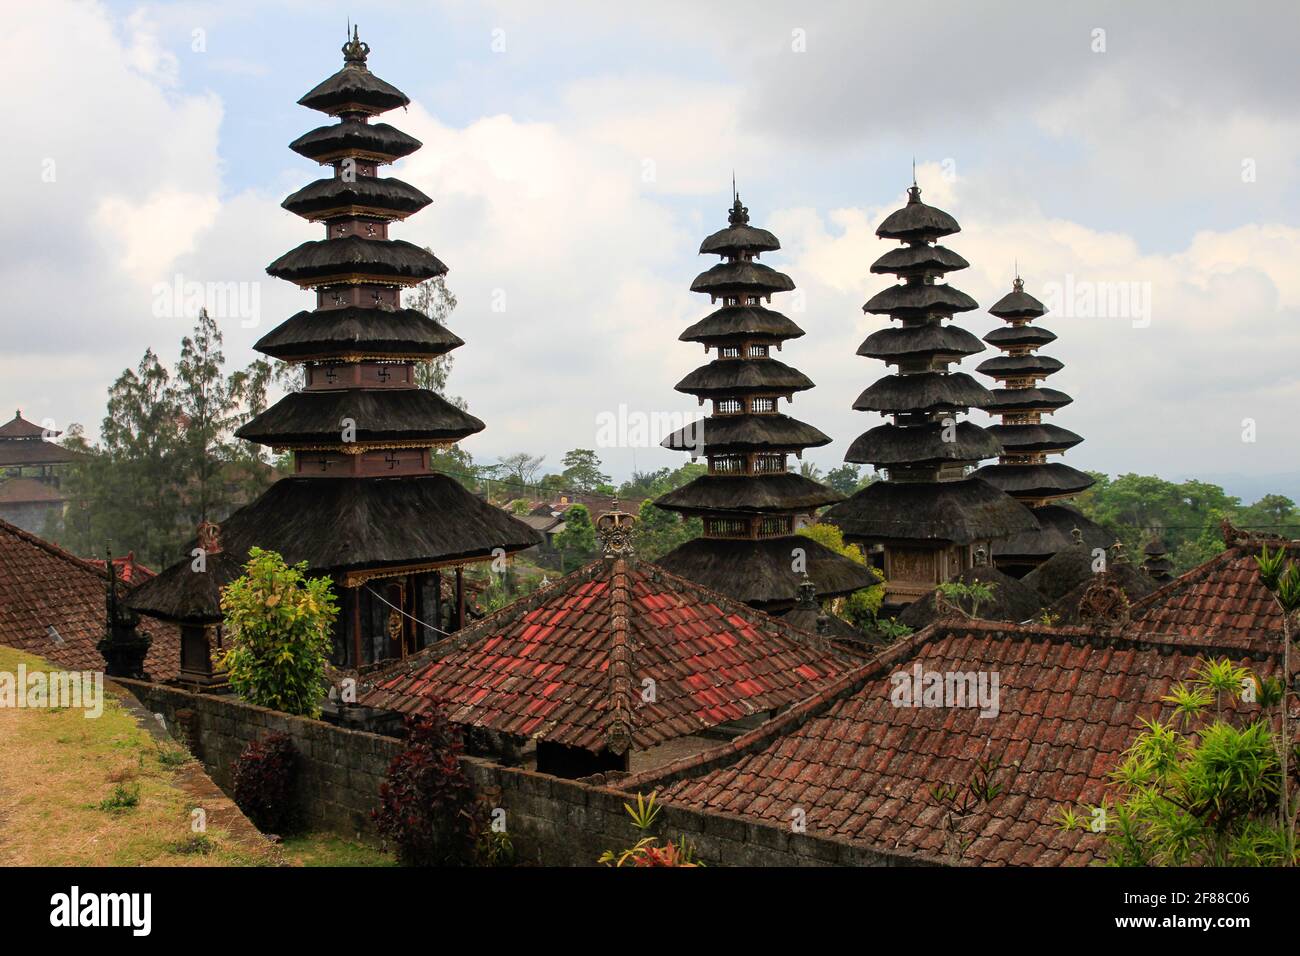 Temple spires of Pura Besakih with red roofs in Bali, Indonesia Stock Photo